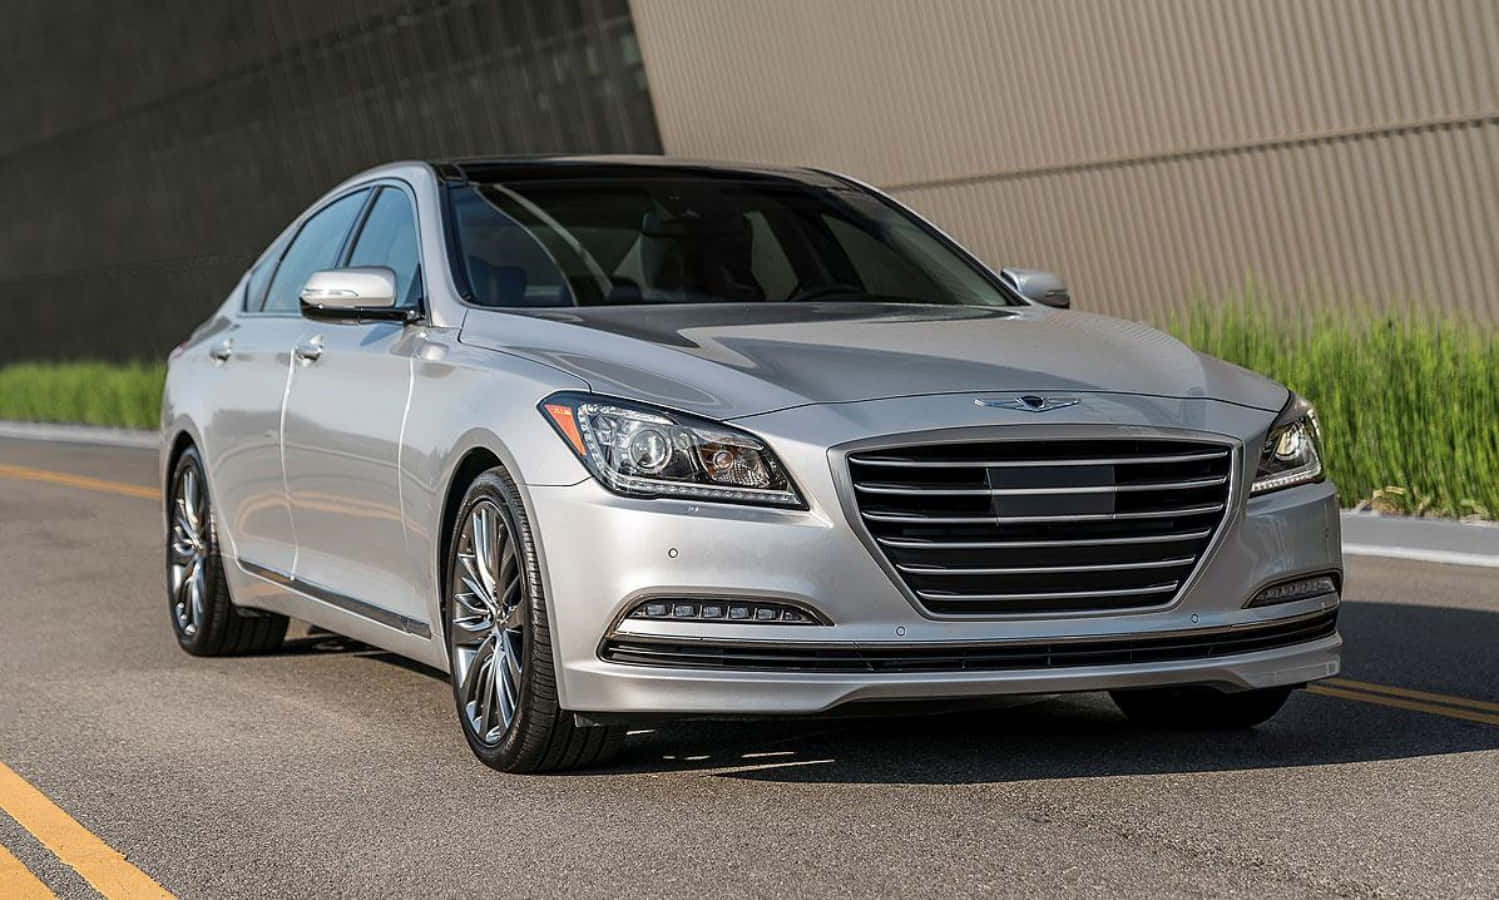 The Silver Hyundai Genesis Is Driving Down The Road